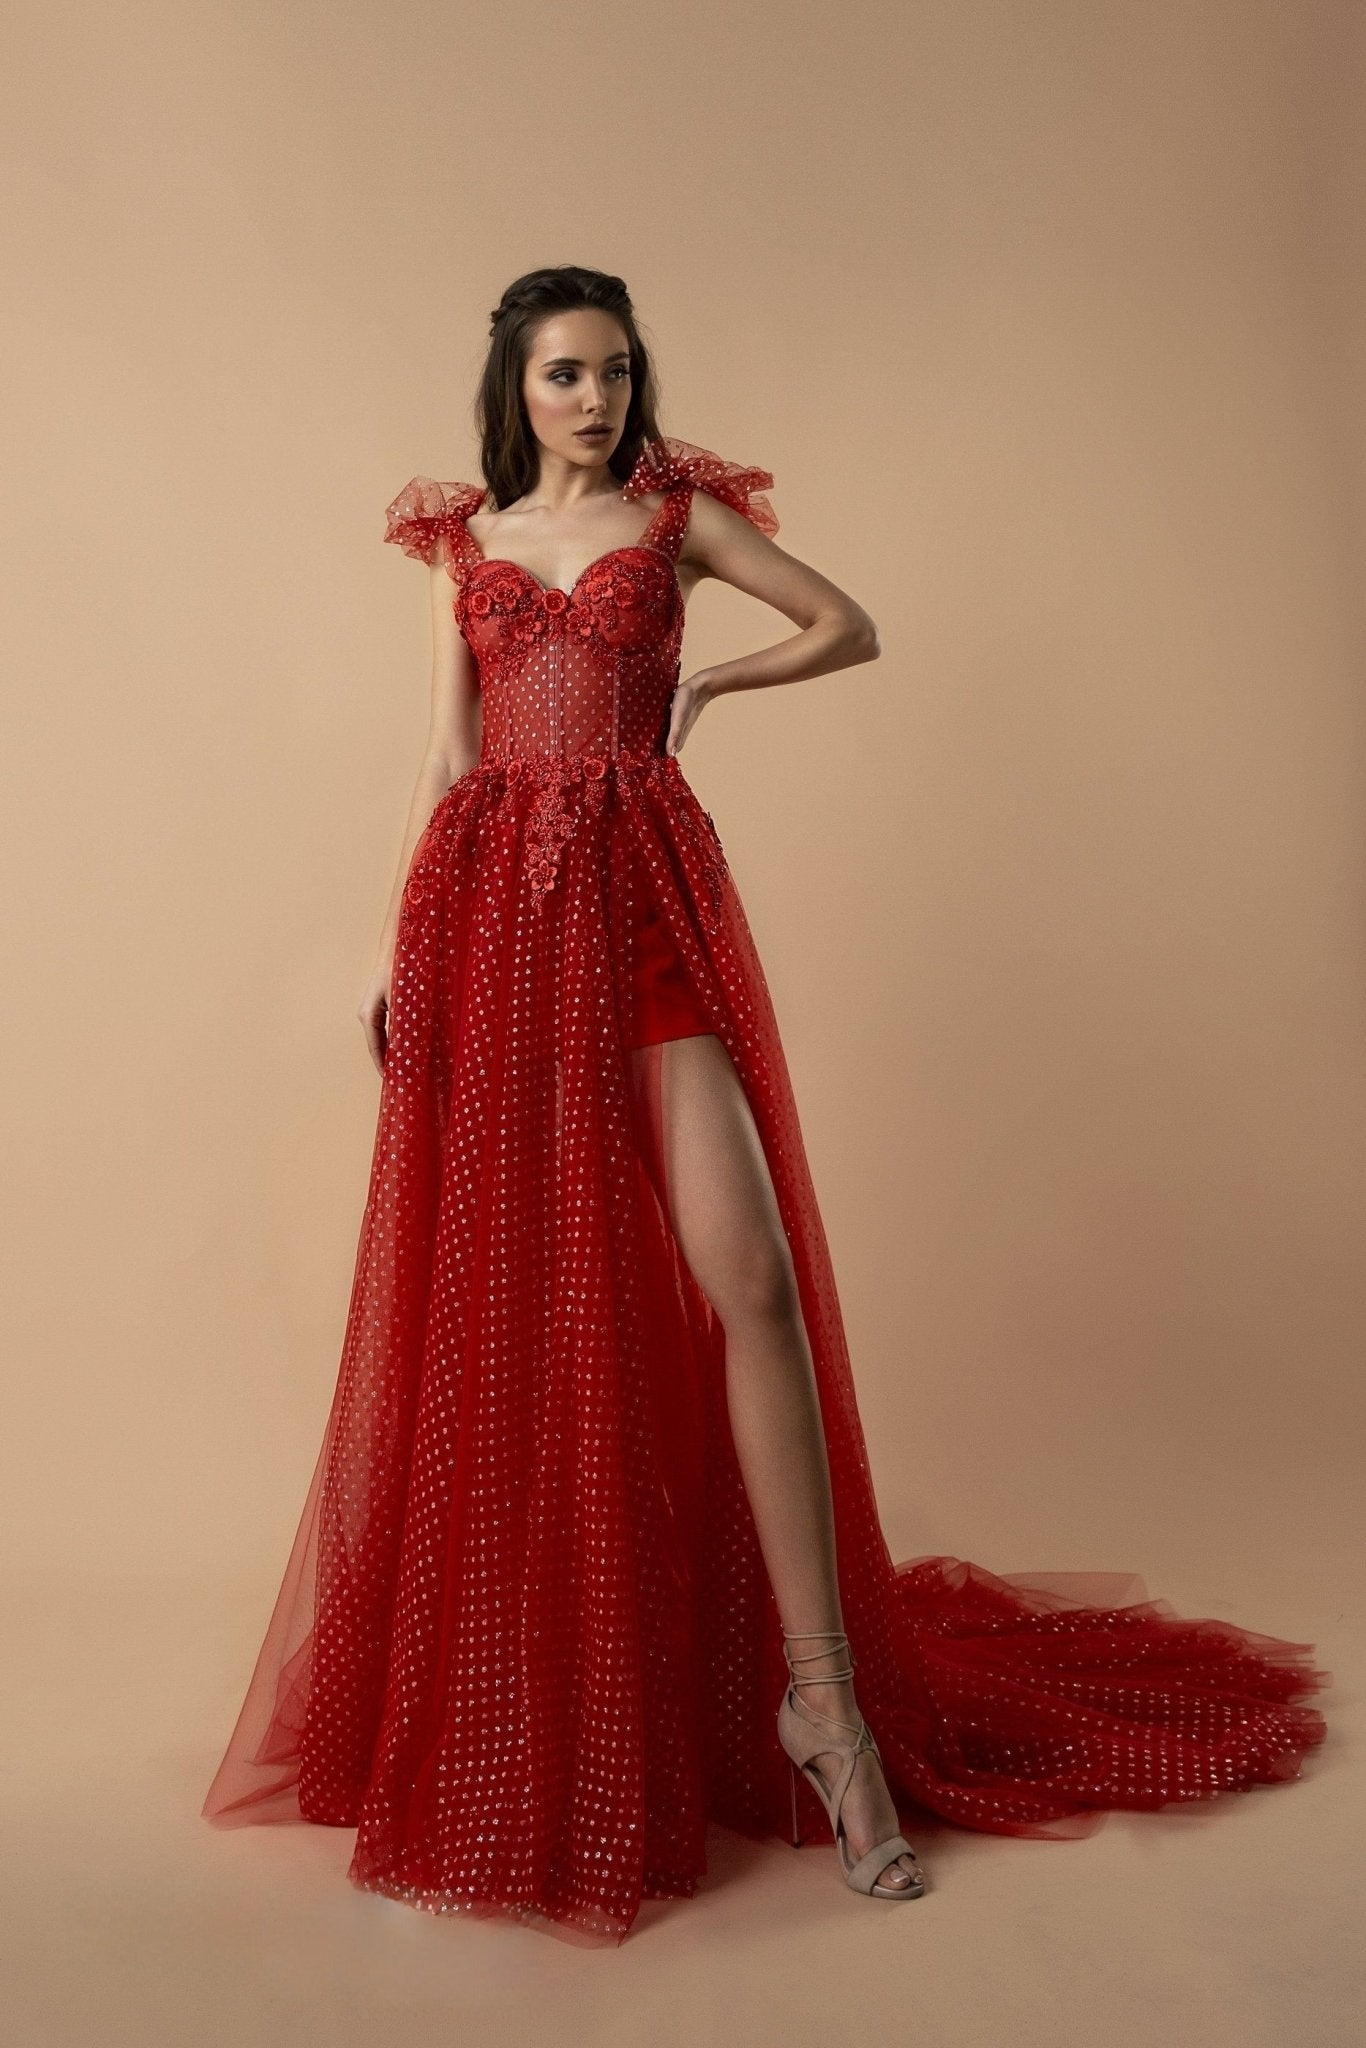 Gothic Red Sequin Tulle Gown with Thigh-High Slit - Appliquéd Wedding Dress Plus Size - WonderlandByLilian